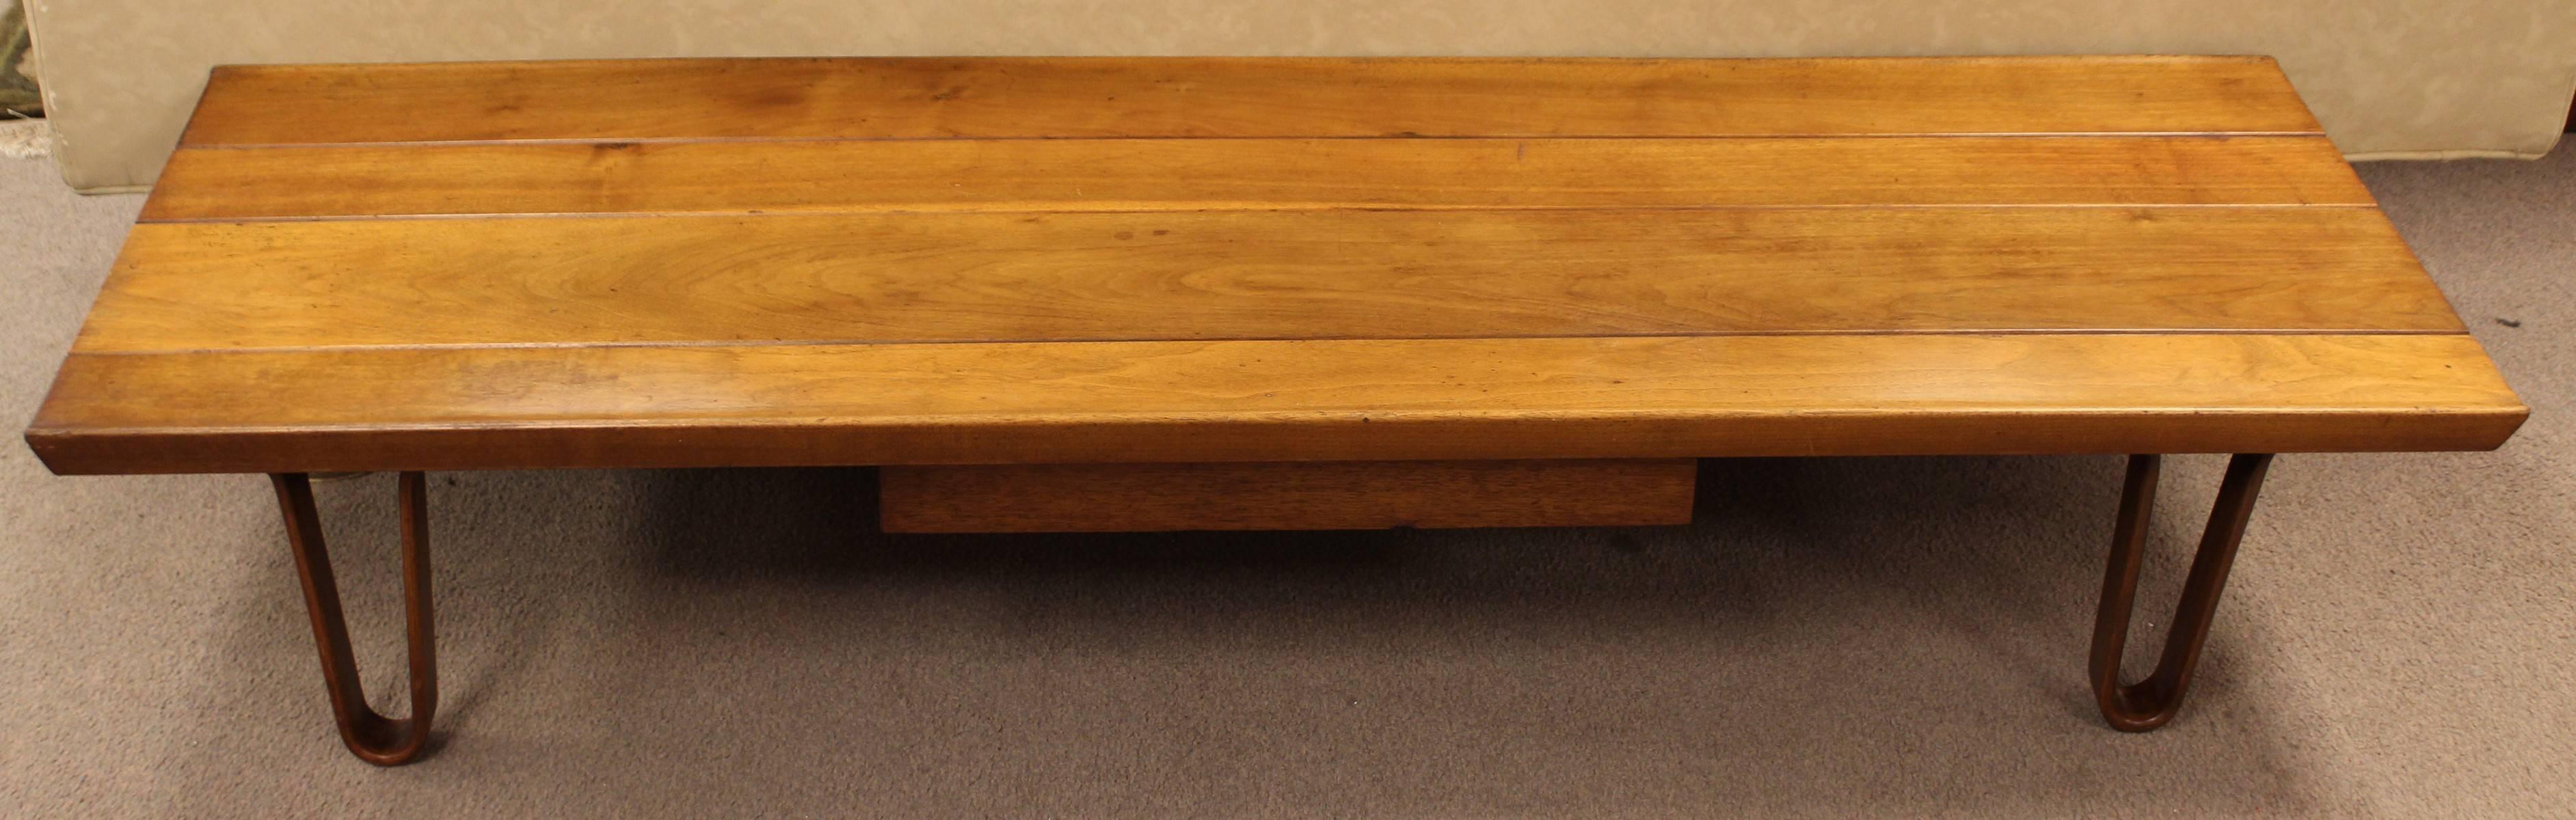 Classic long john table or bench with drawer by Edward Wormley for Dunbar. In excellent condition. Professionally refinished. The dimensions are 60